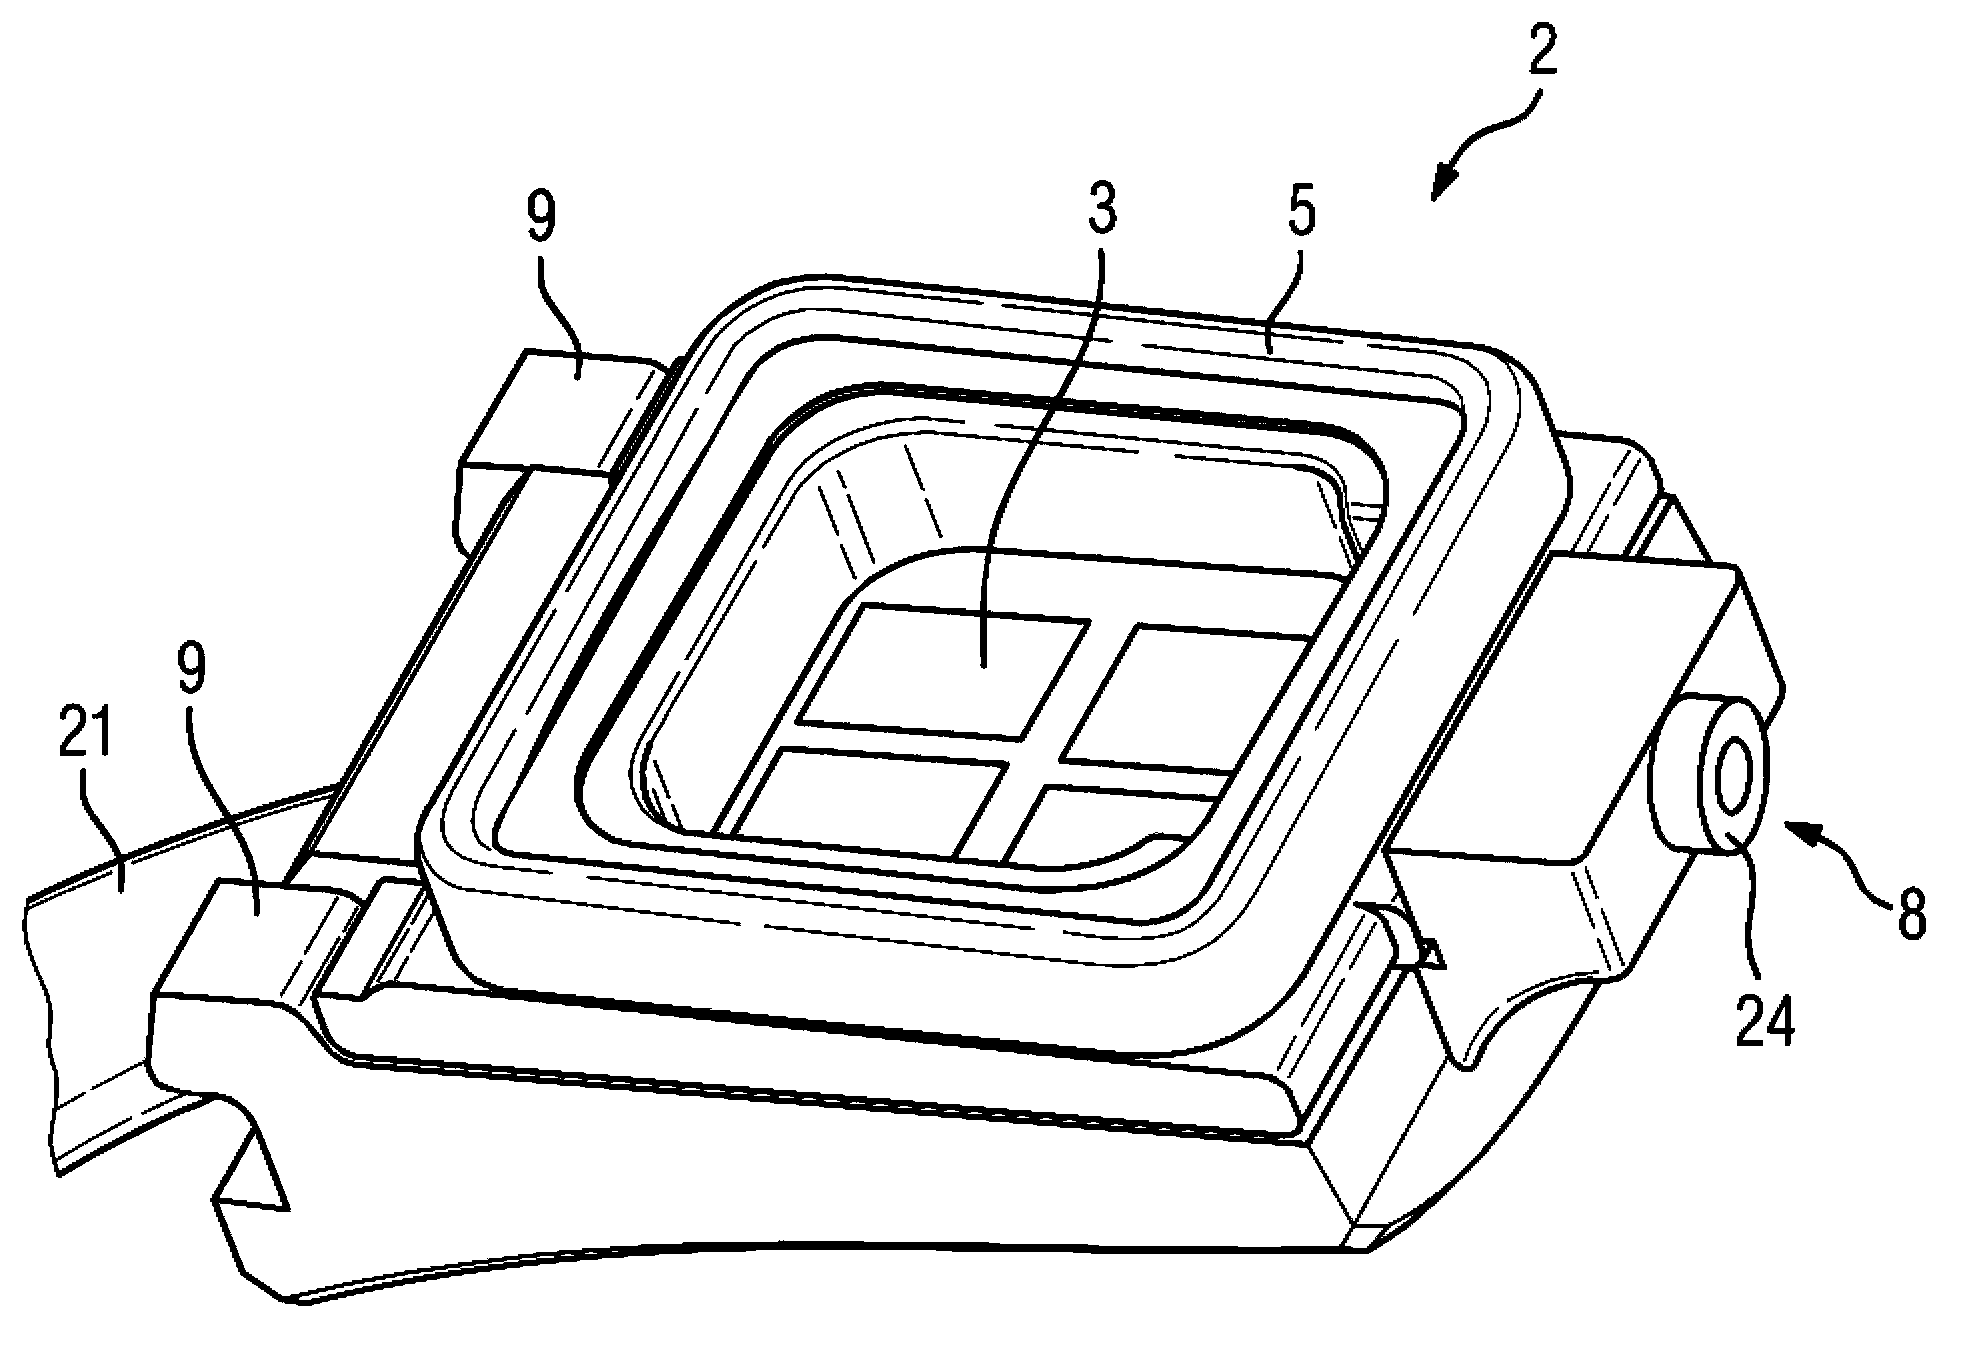 Hybrid hearing instrument system connector